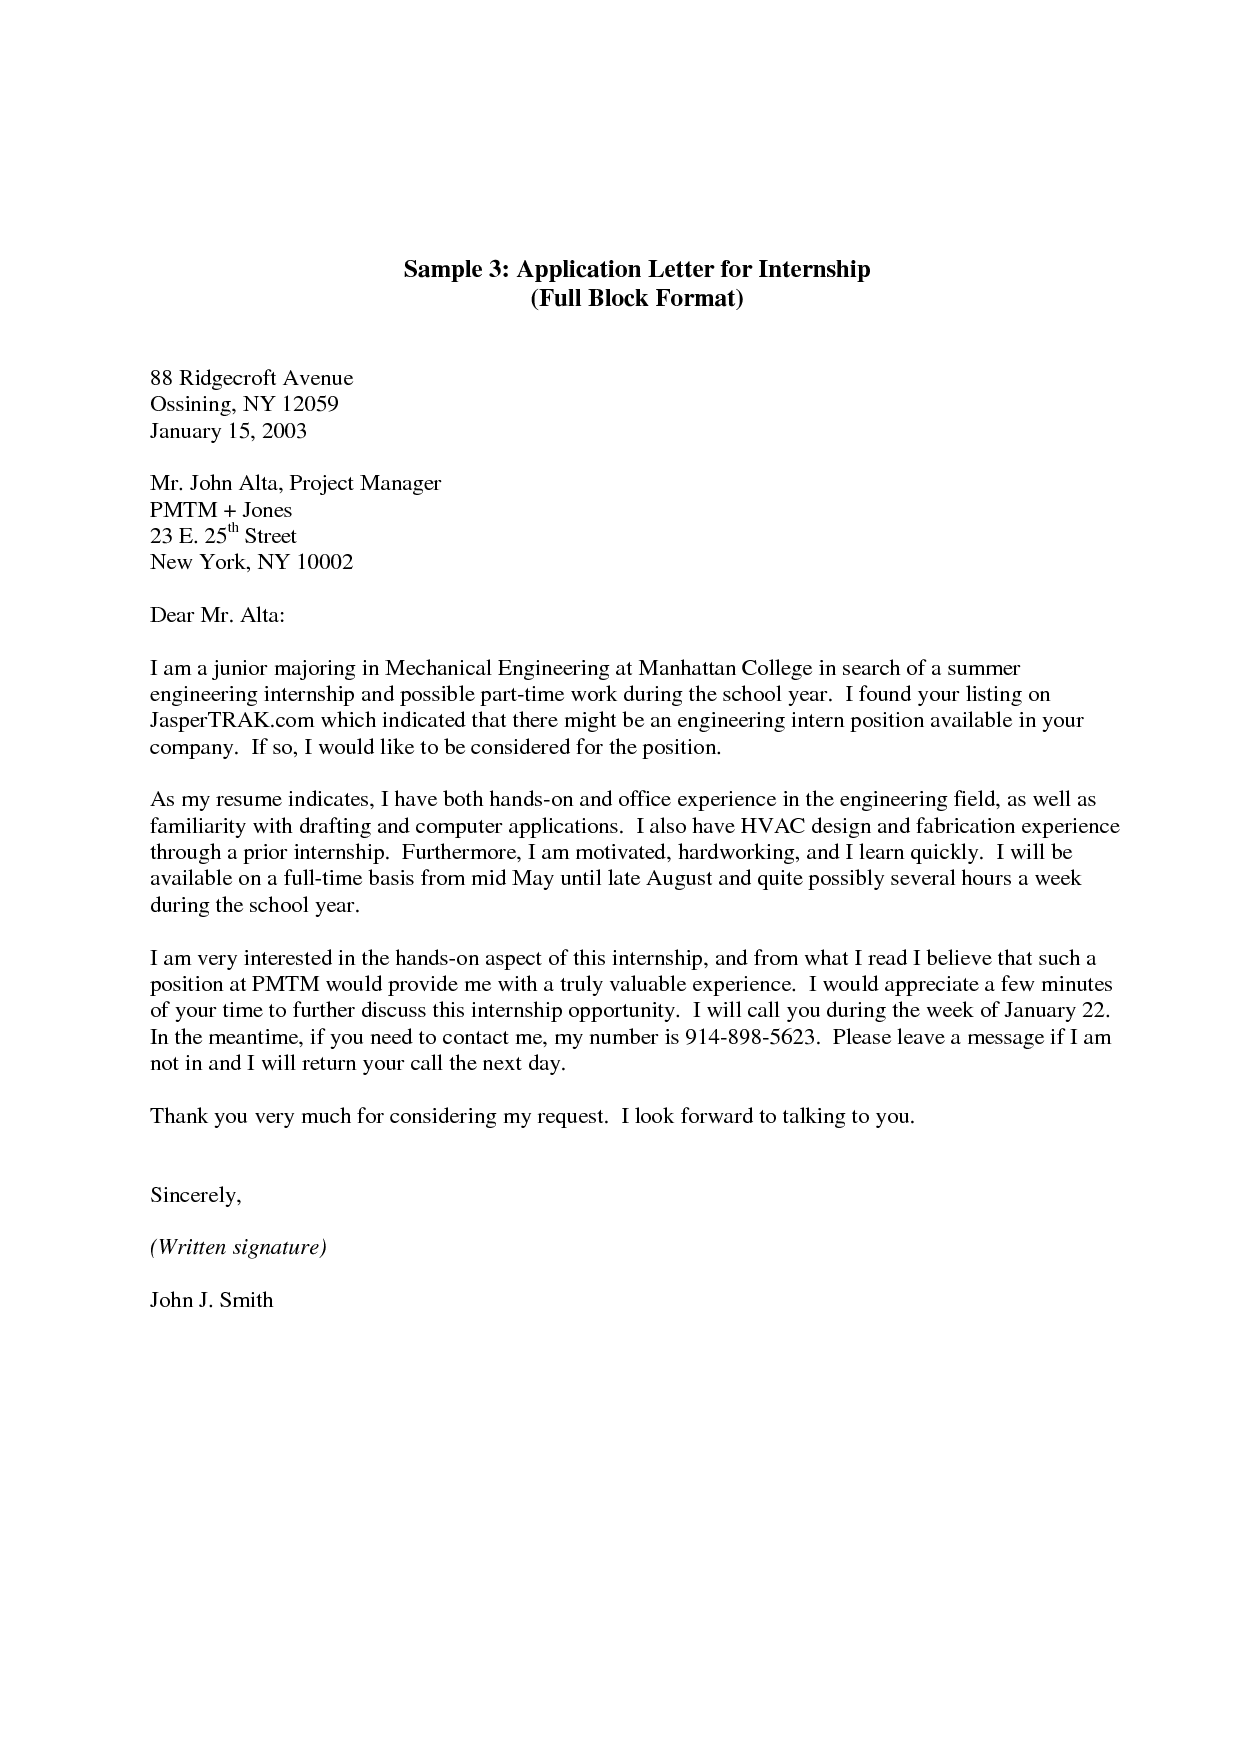 Example Of Application Letter For Internship